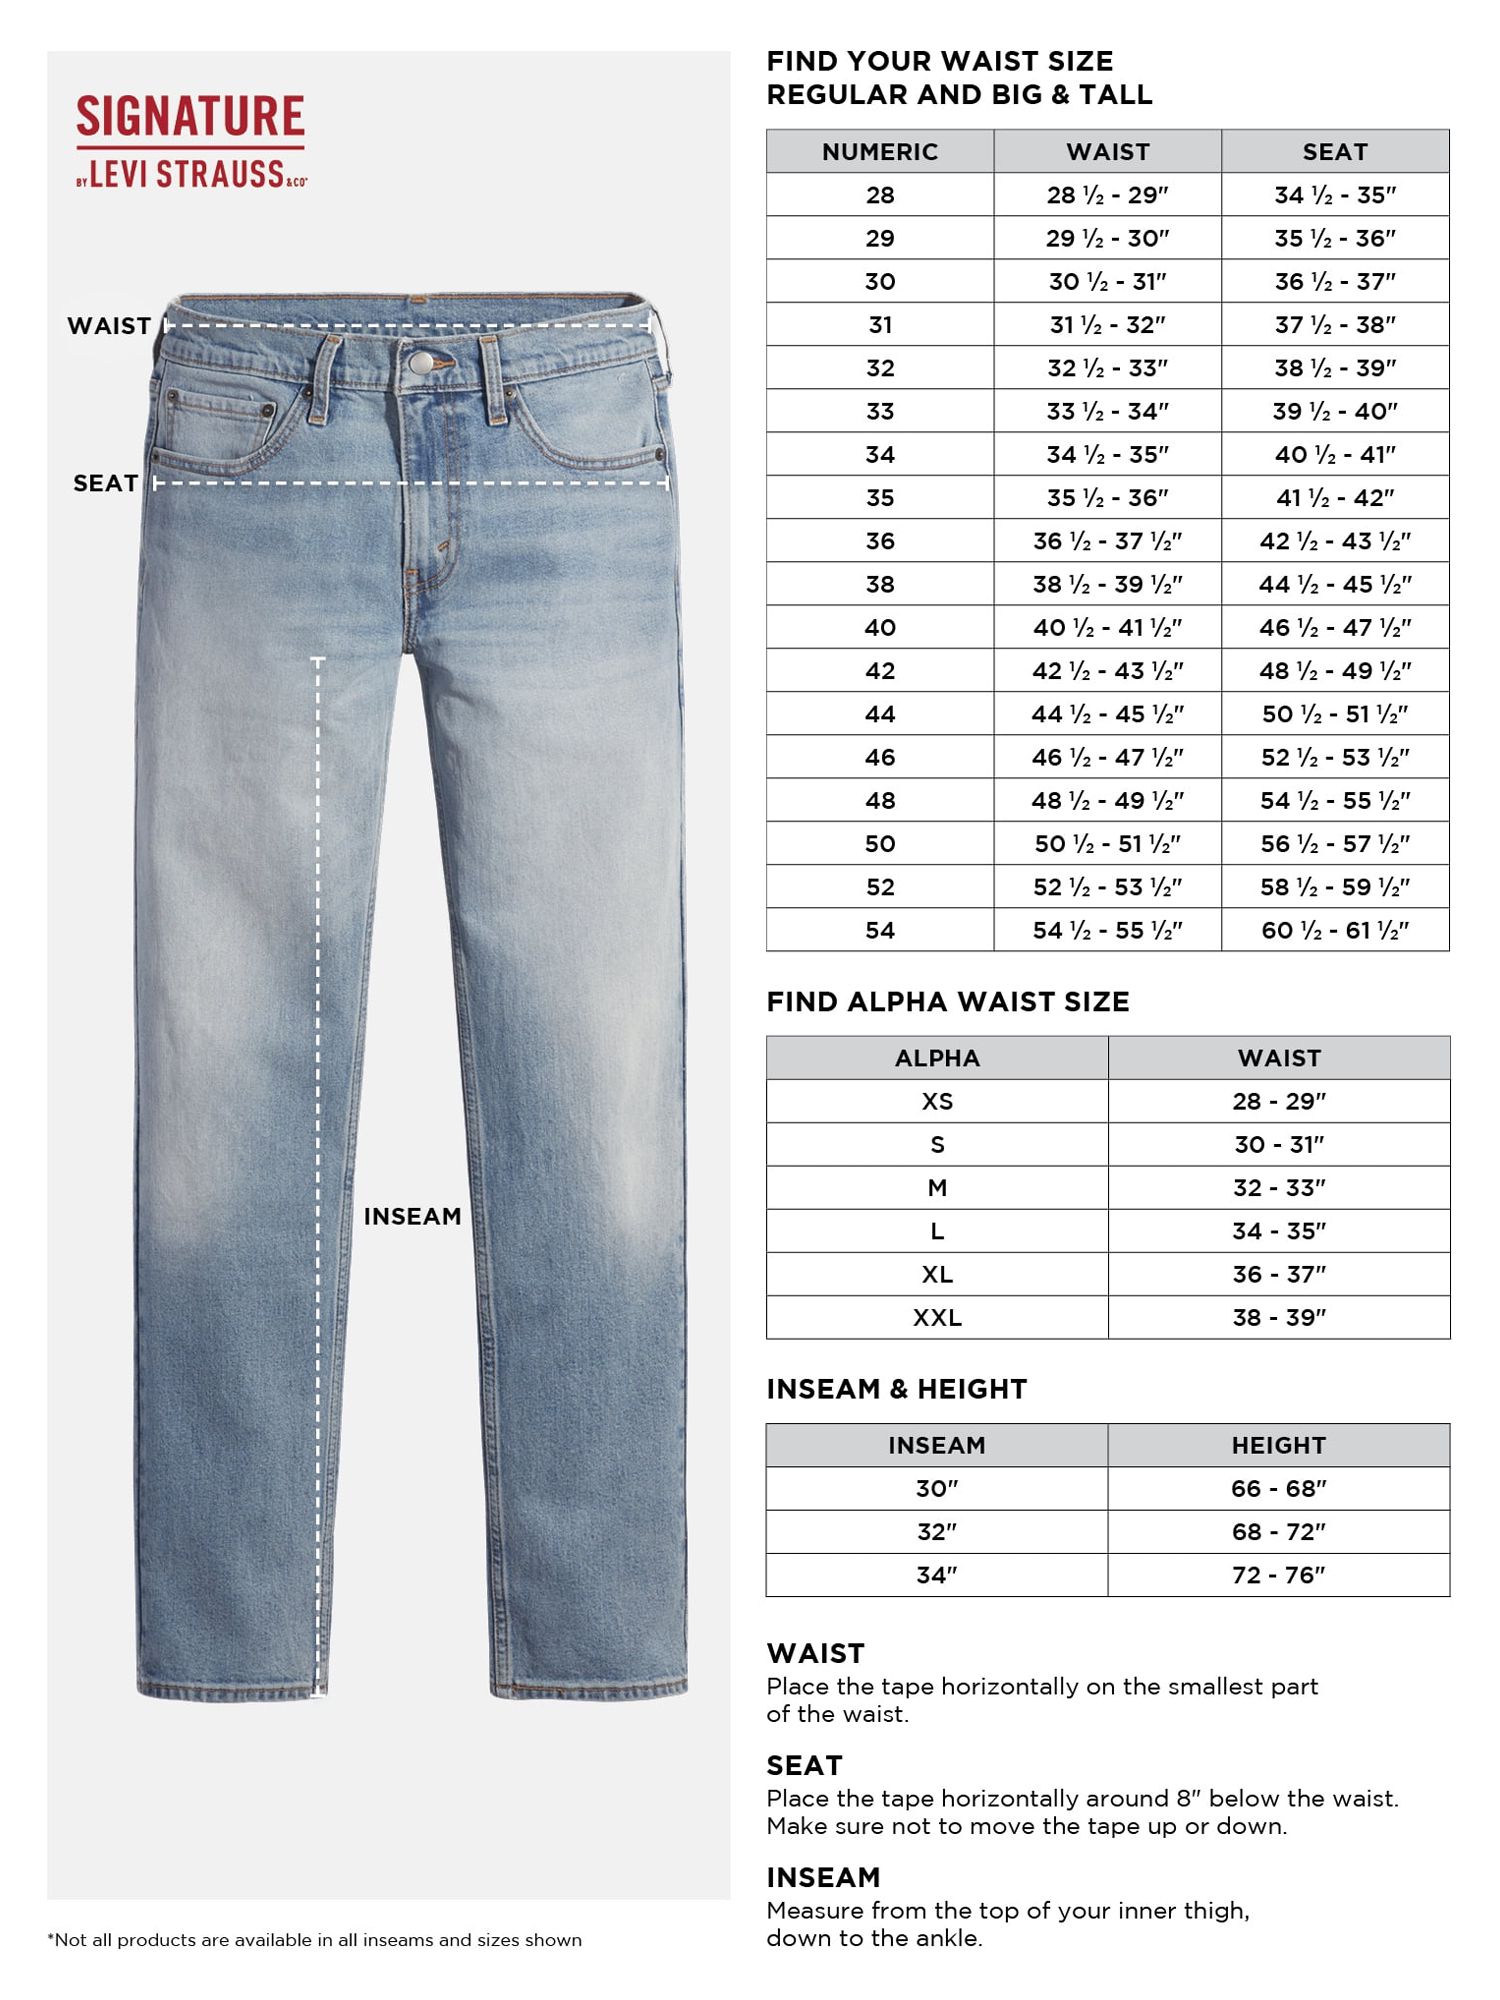 Signature by Levi Strauss & Co. Men's and Big and Tall Straight Fit Jeans - image 5 of 6